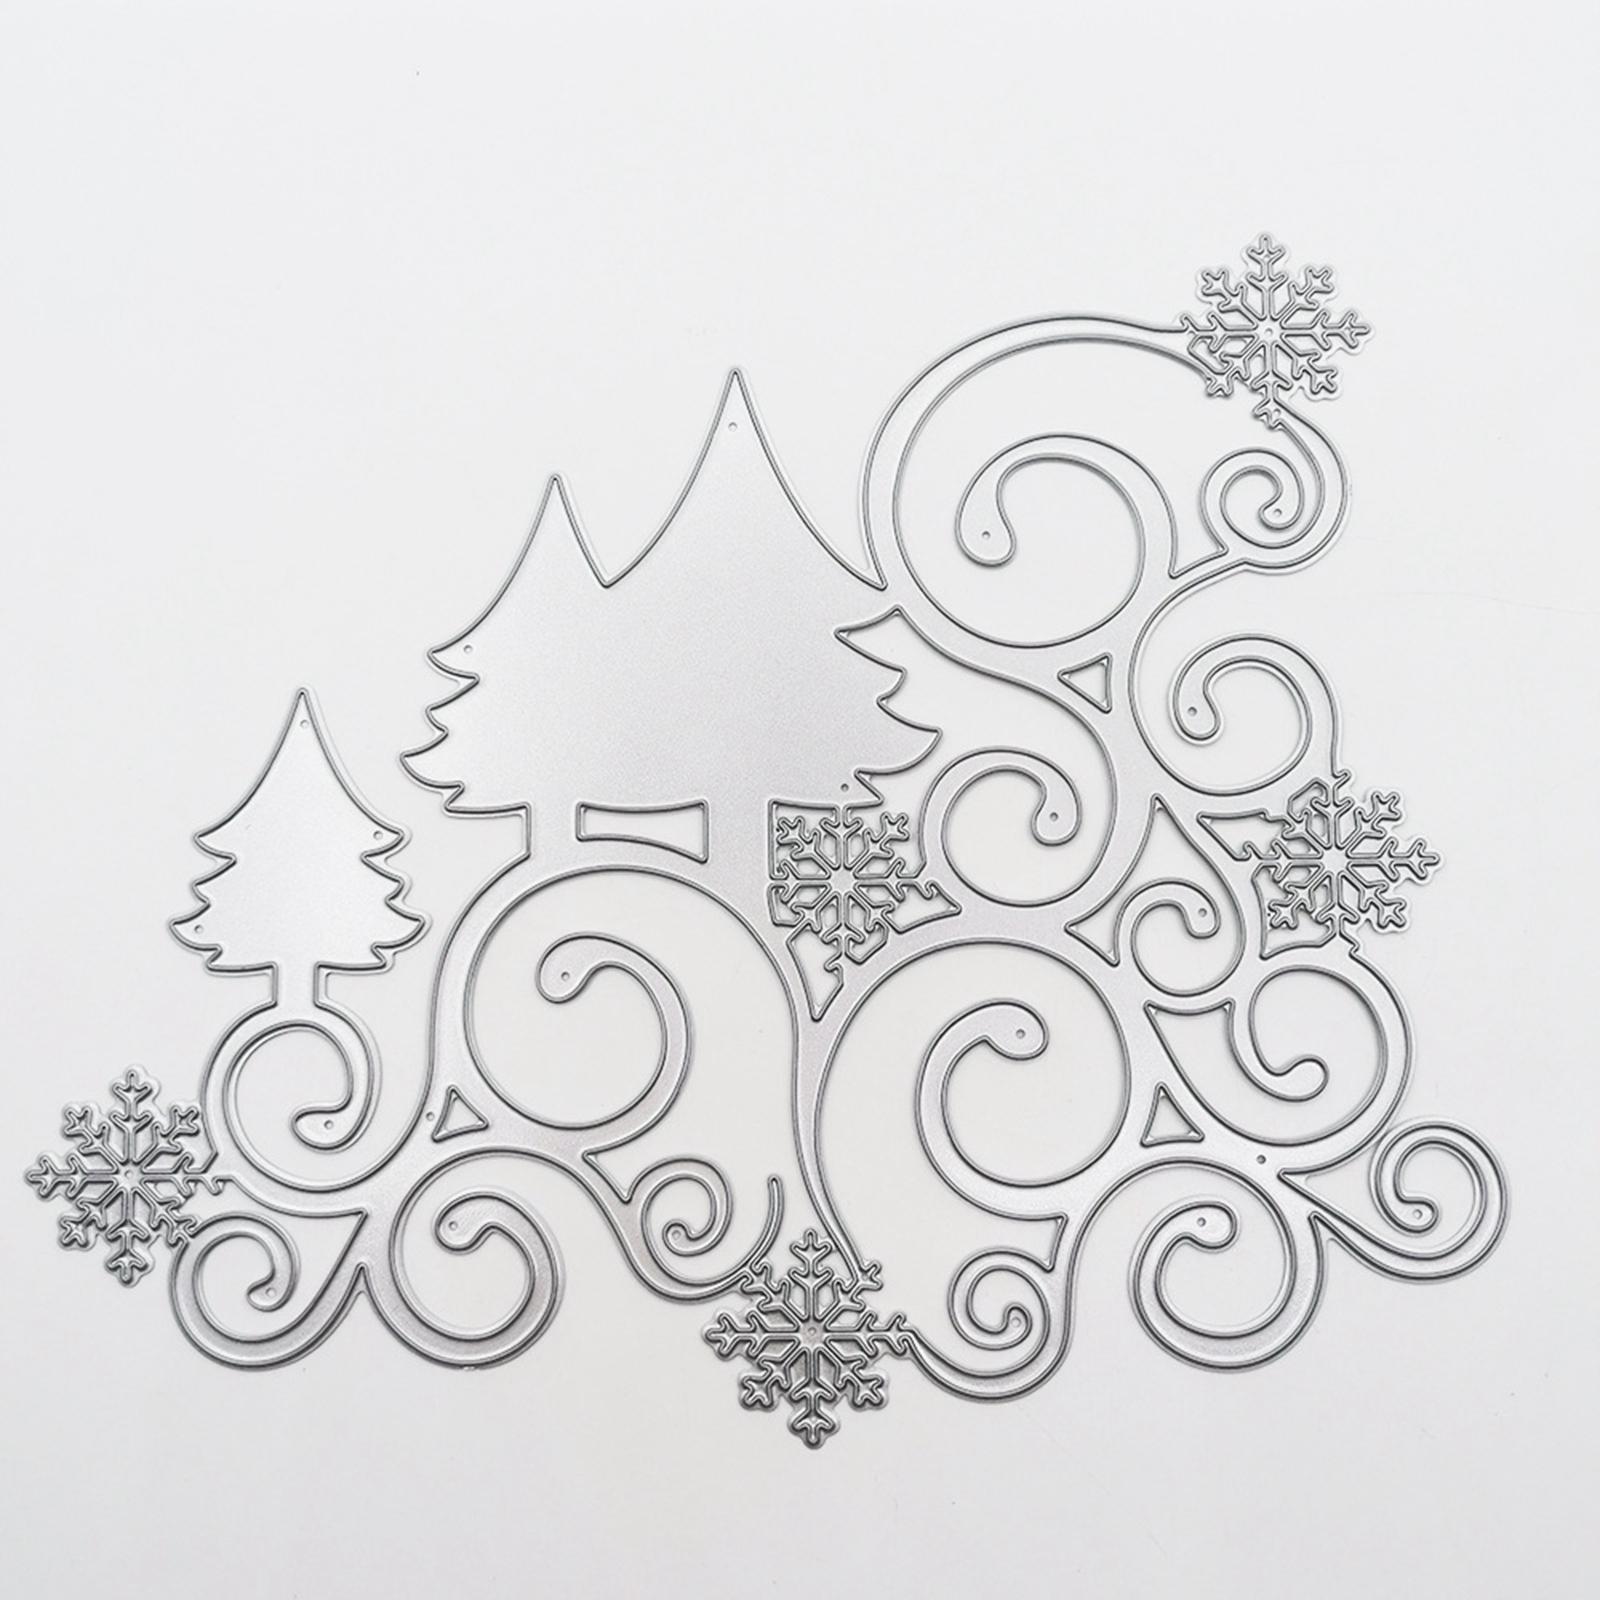 Metal Cutting Dies Cut Stencils for Card Making Supplies Easy to Use Christmas Tree Die Cuts